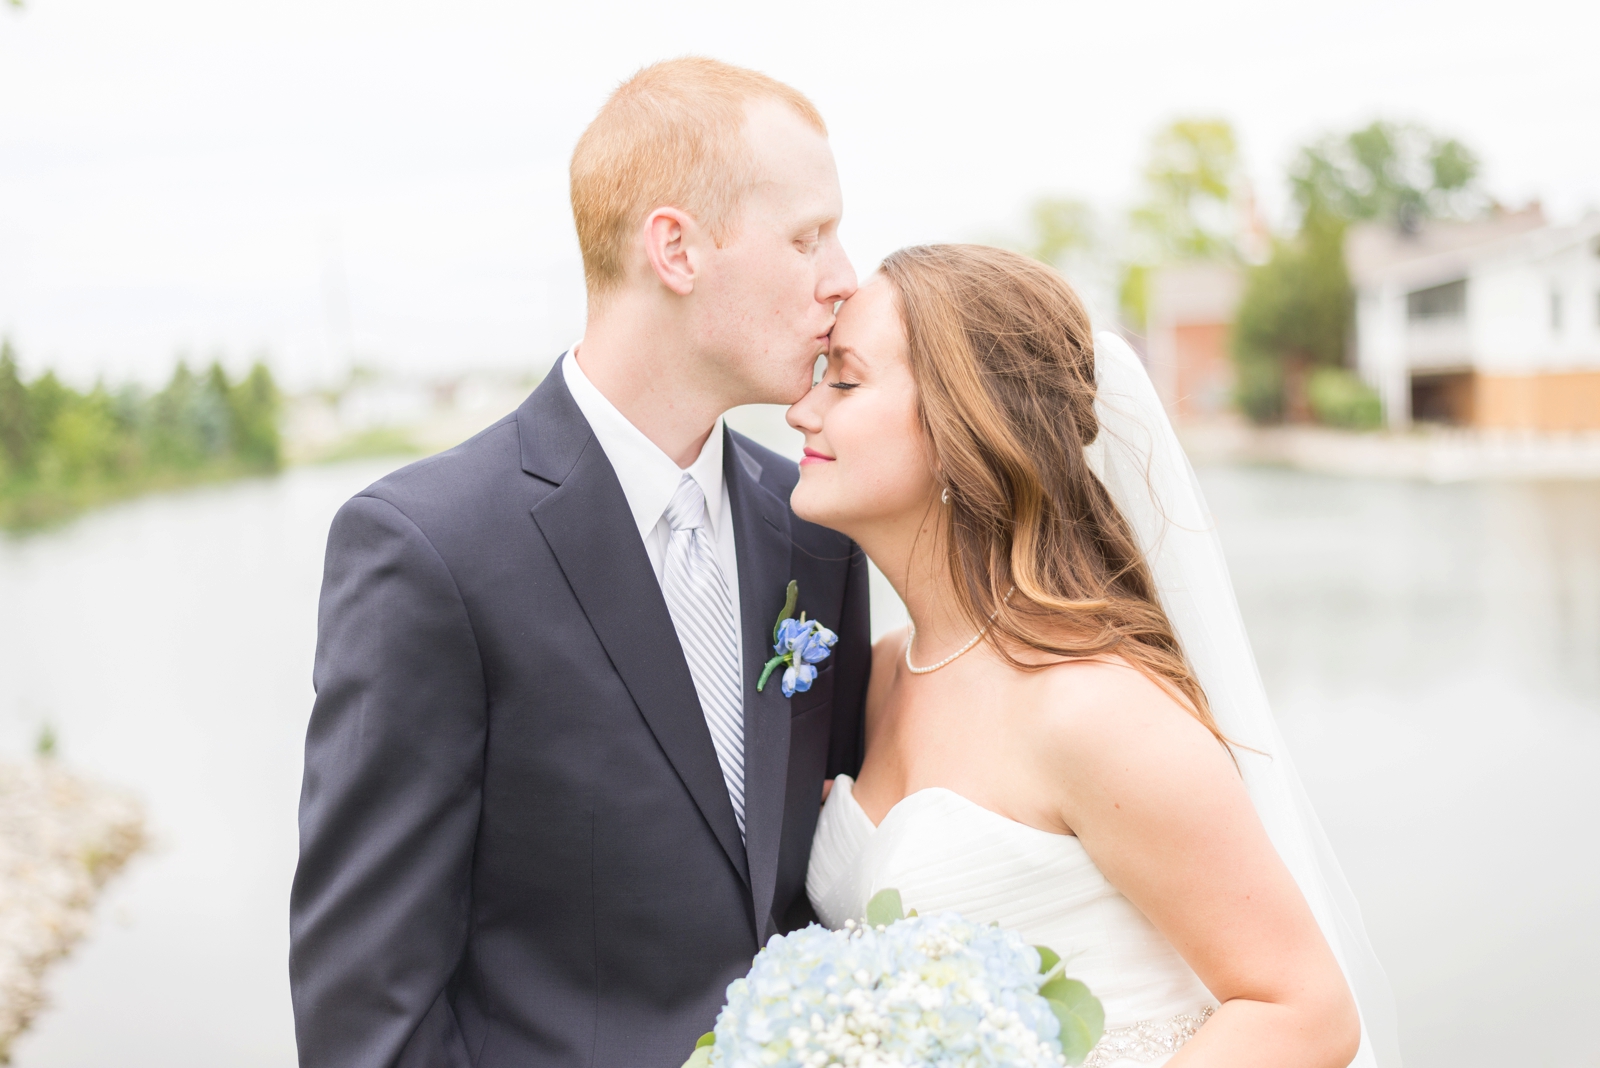 groom-kissing-his-bride-on-the-forehead